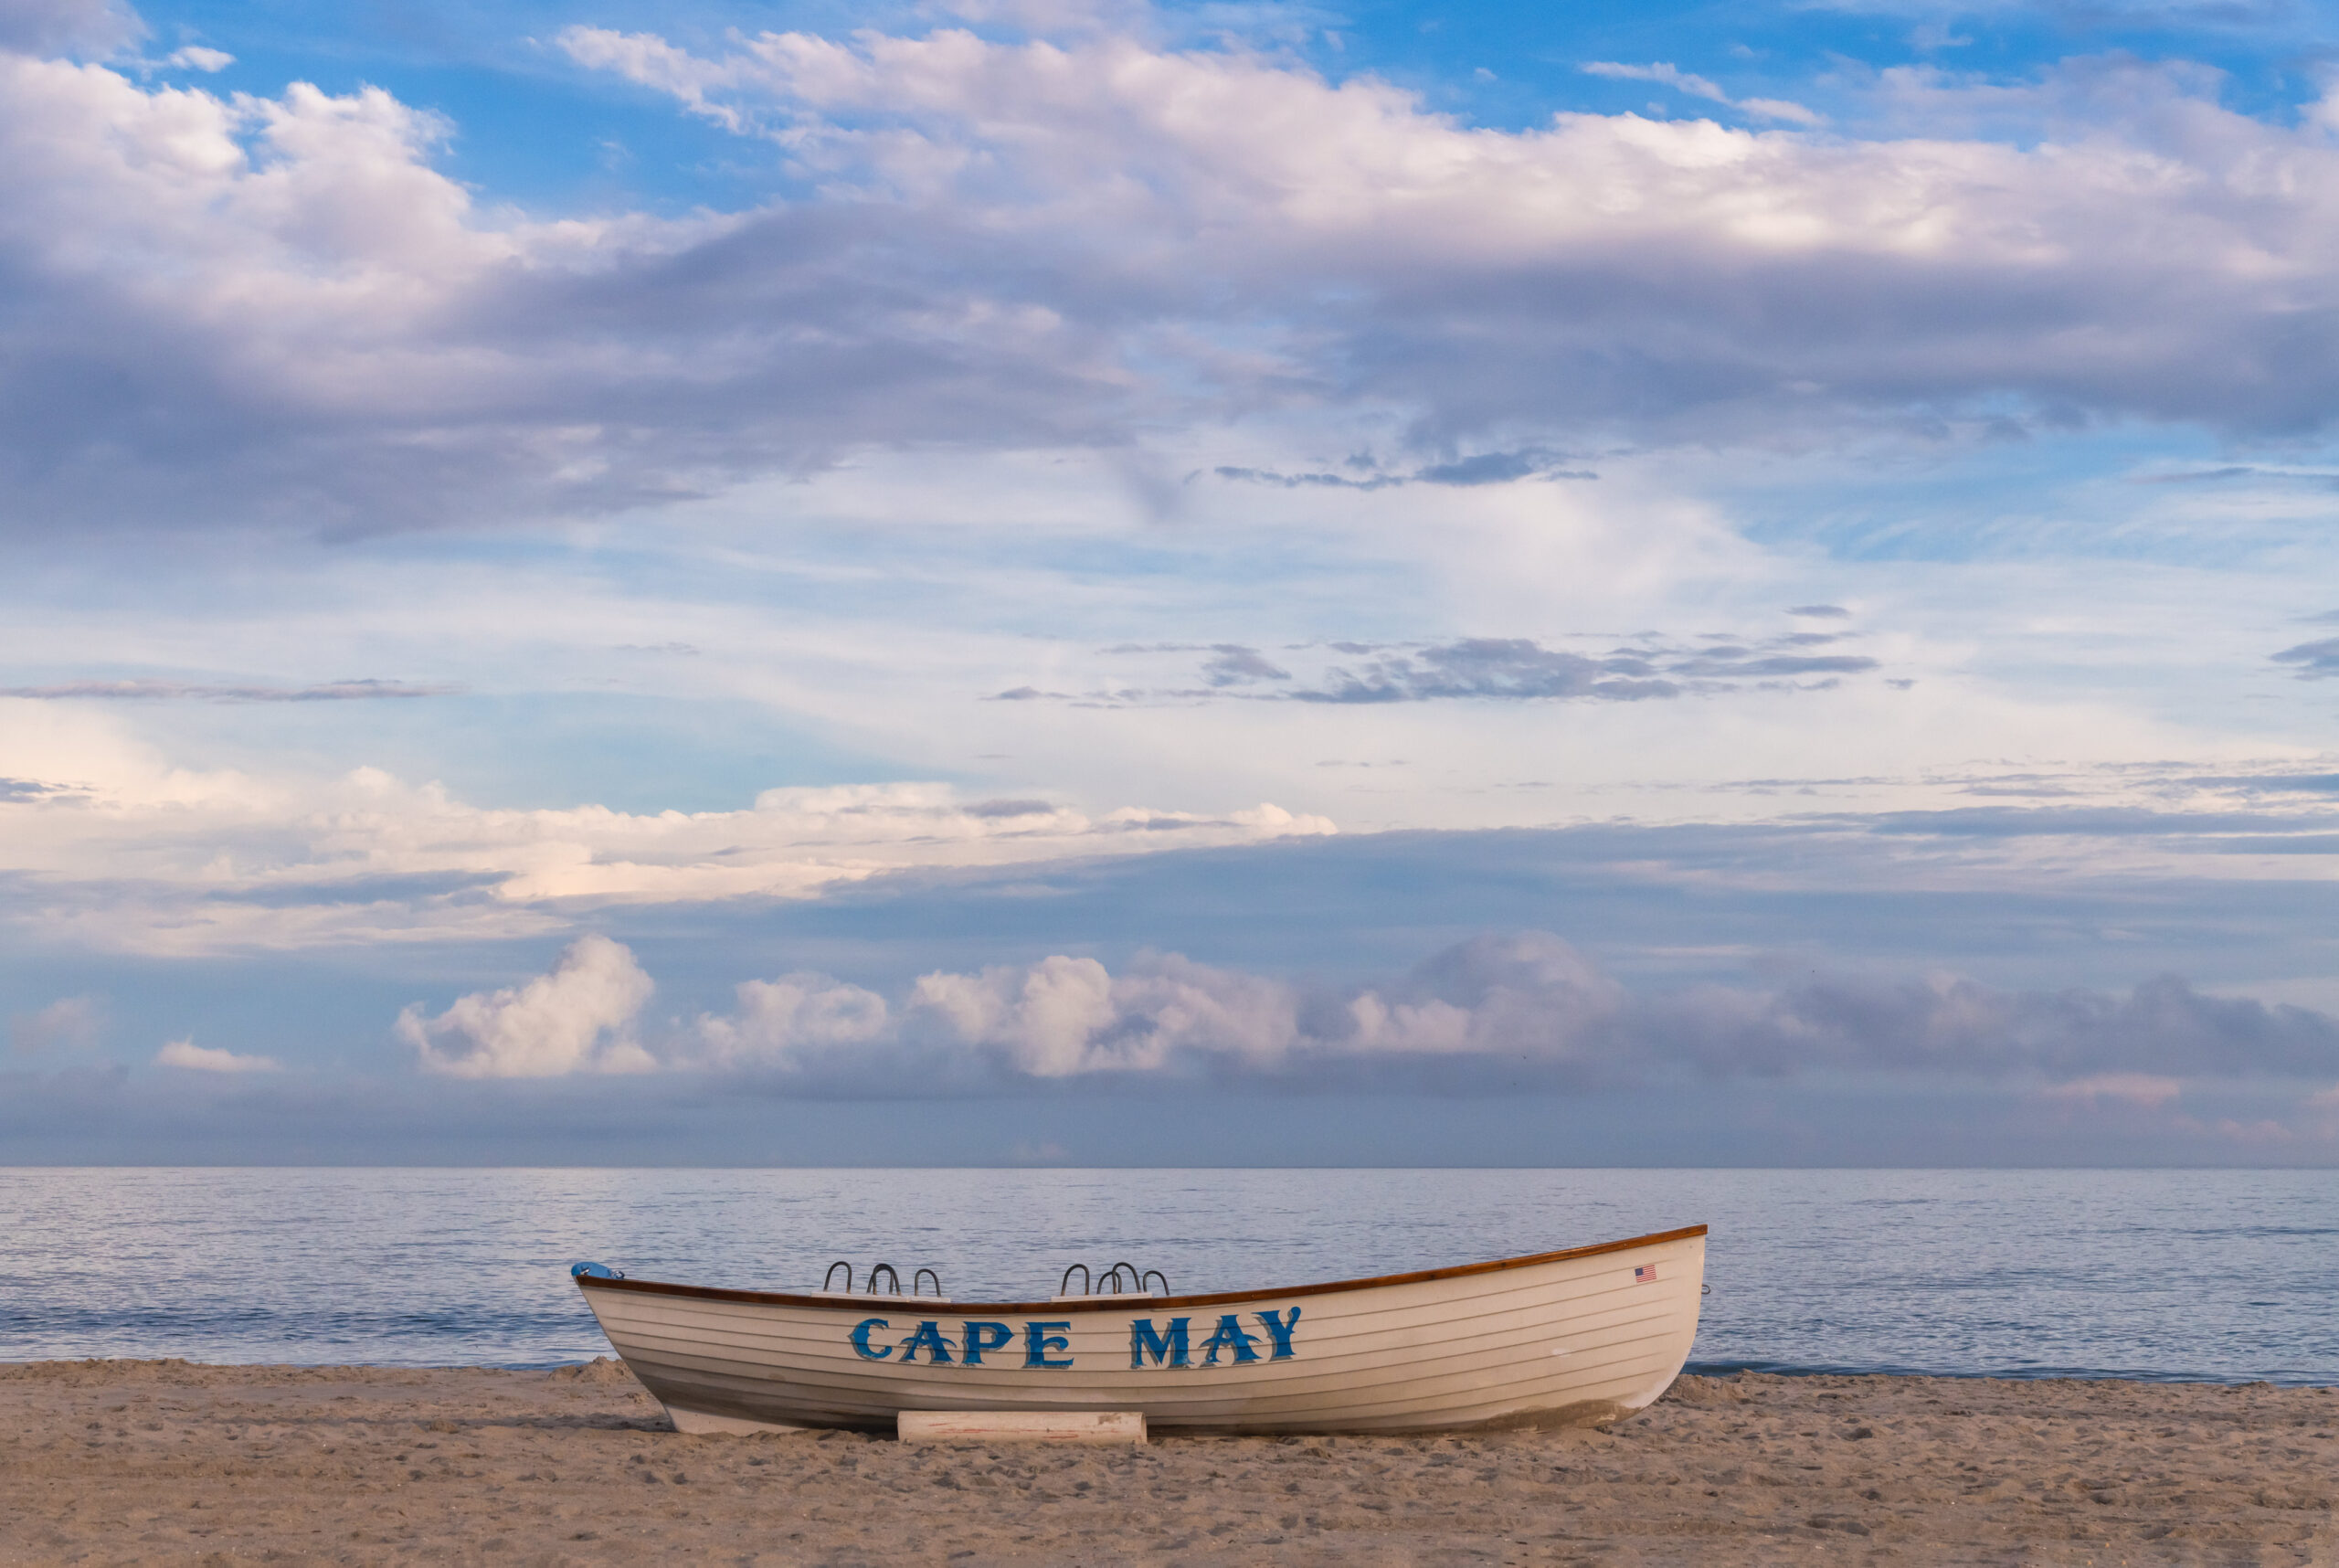 A Cape May lifeguard boat on the beach in front of a flat crystal clear ocean, and wispy blue and white clouds in the sky